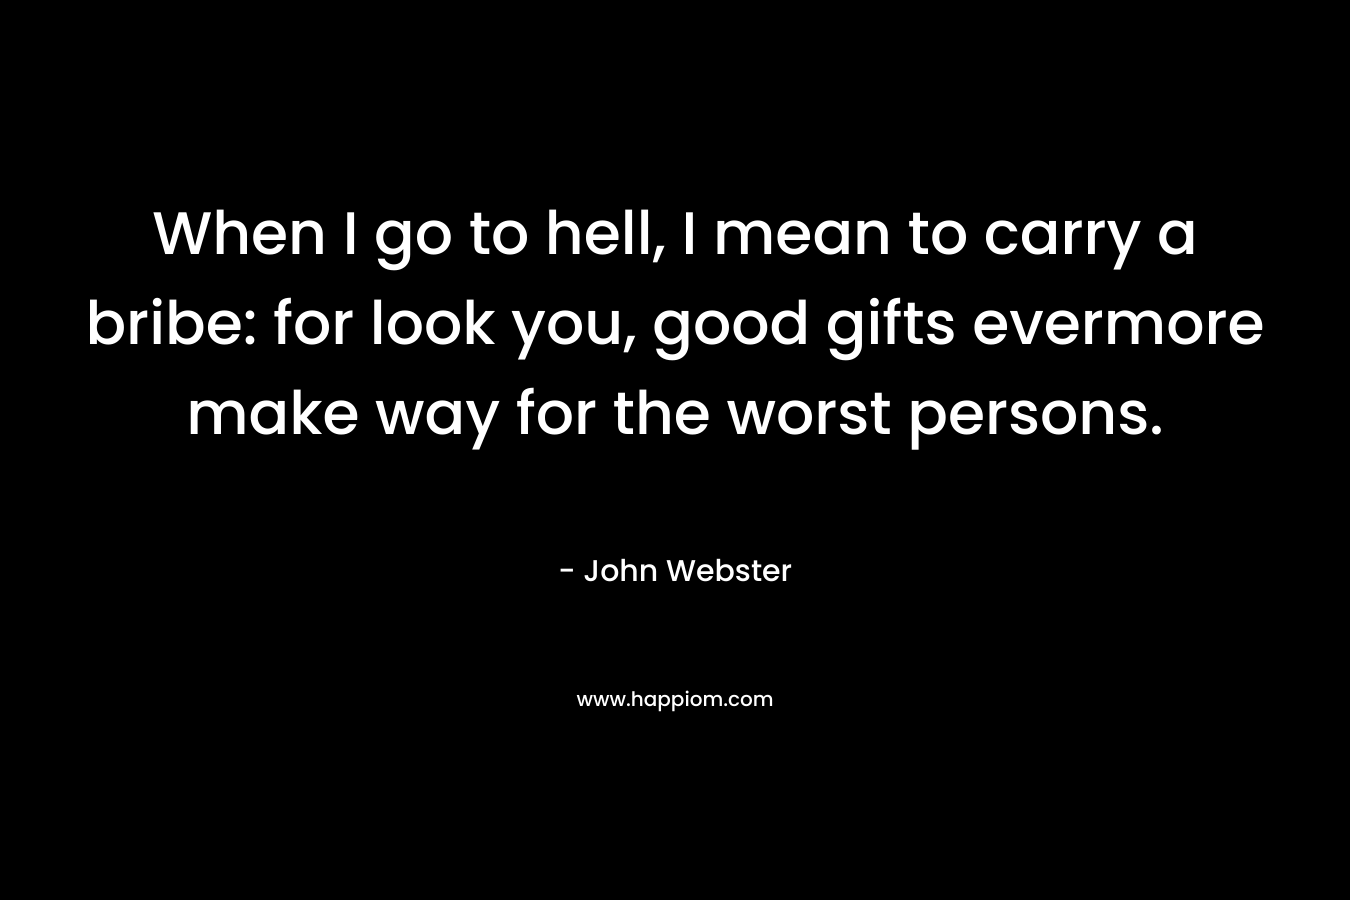 When I go to hell, I mean to carry a bribe: for look you, good gifts evermore make way for the worst persons. – John Webster